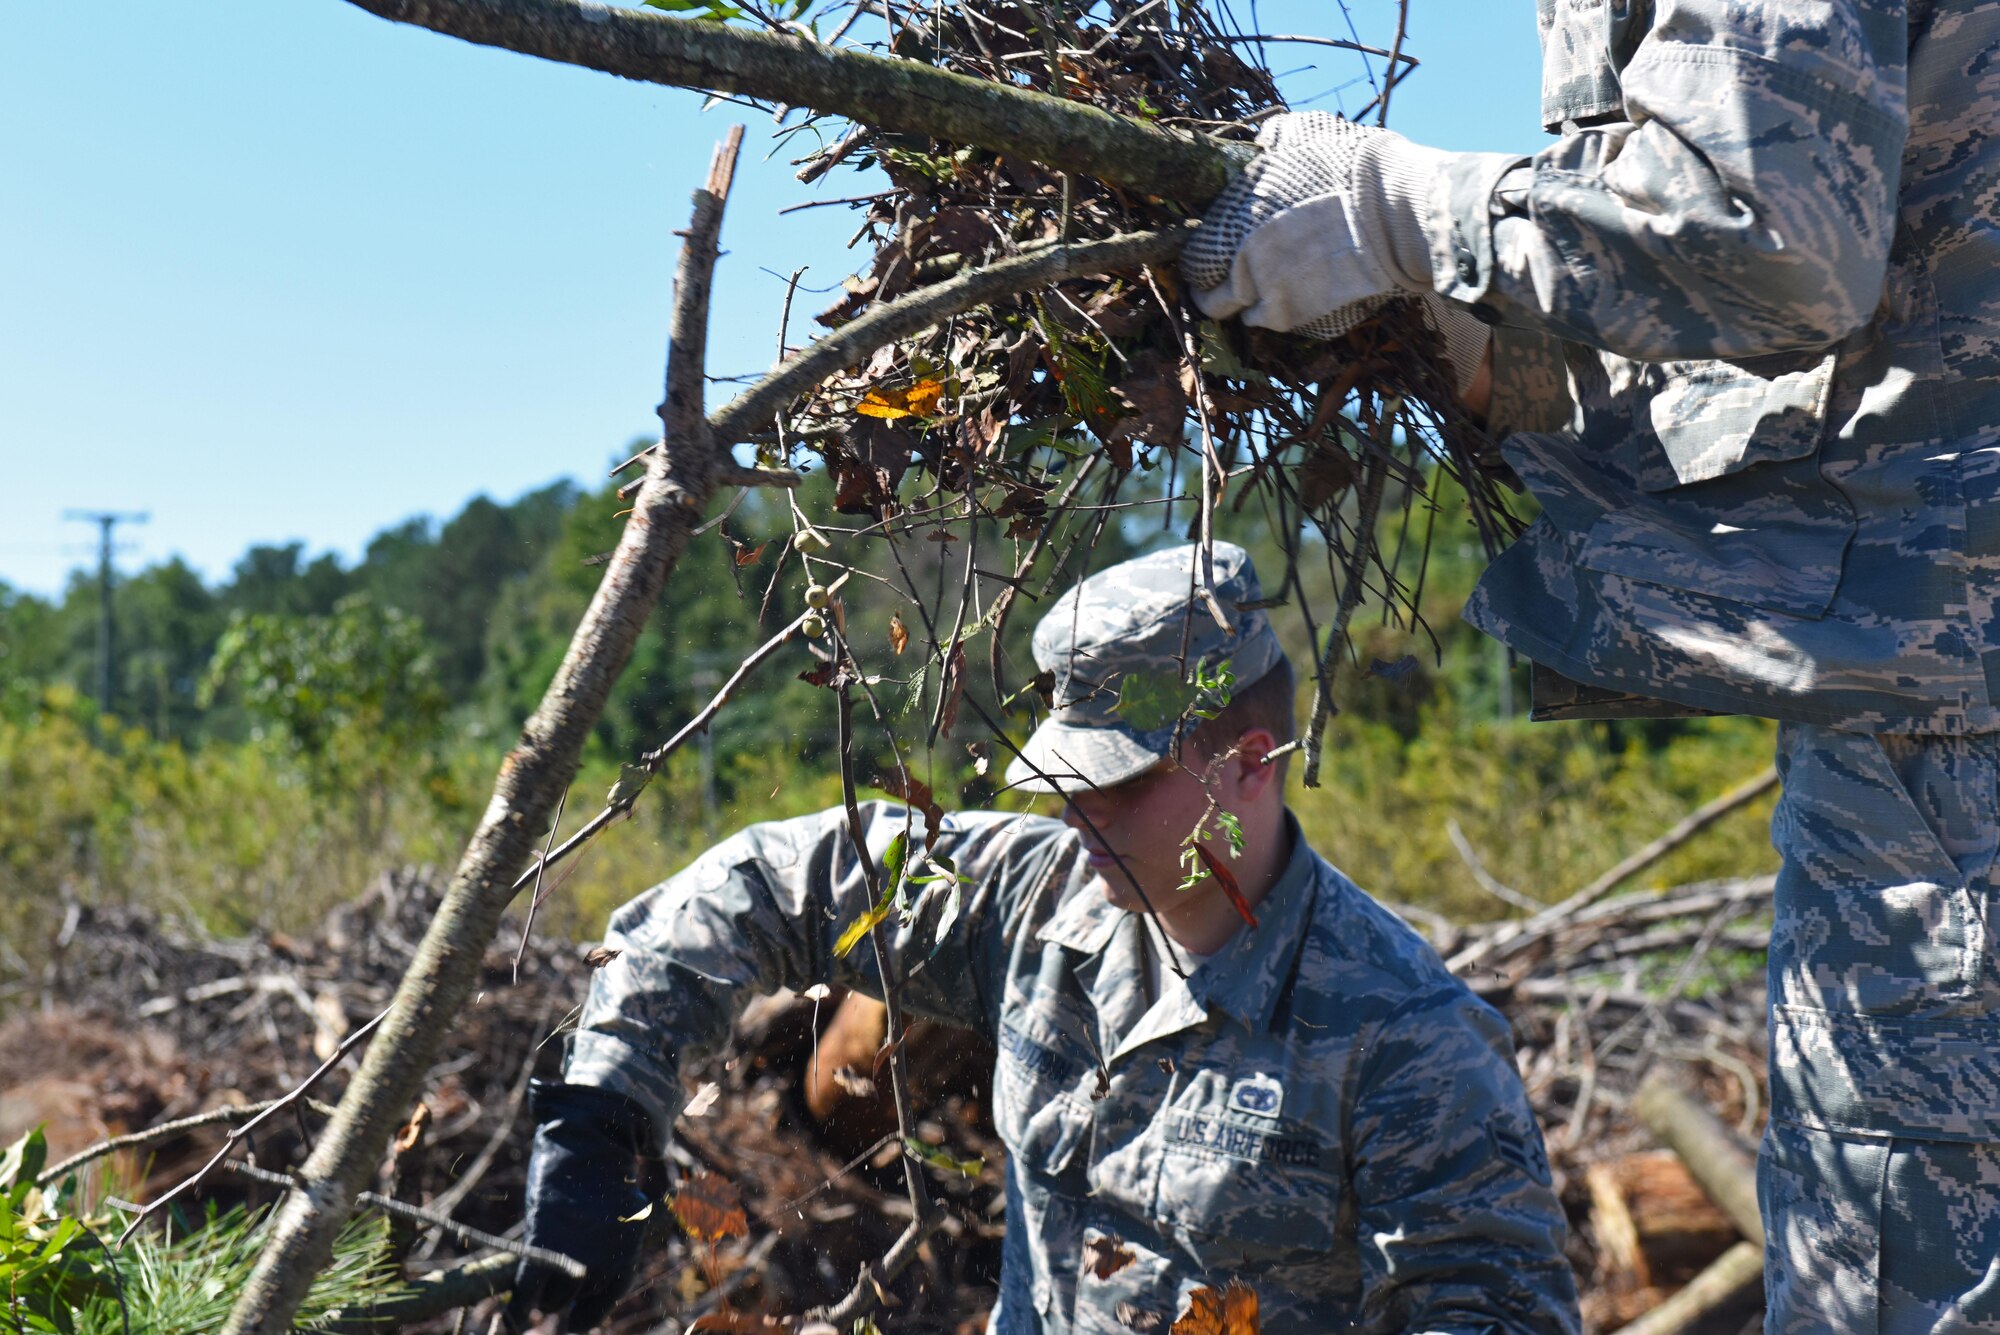 Airman 1st Class Tyan Beaudoin (center), 4th Logistics Readiness Squadron vehicle operations technician, and Airman Basic Connor Turvy (right), 4th Component Maintenance Squadron fuel systems technician, clean up the aftermath of Hurricane Matthew, Oct. 9, 2016, at Seymour Johnson Air Force Base, North Carolina. Seymour Johnson AFB Airmen cleaned up branches from the several trees that were uprooted all over base during the storm. (U.S. Air Force photo by Airman 1st Class Ashley Williamson)